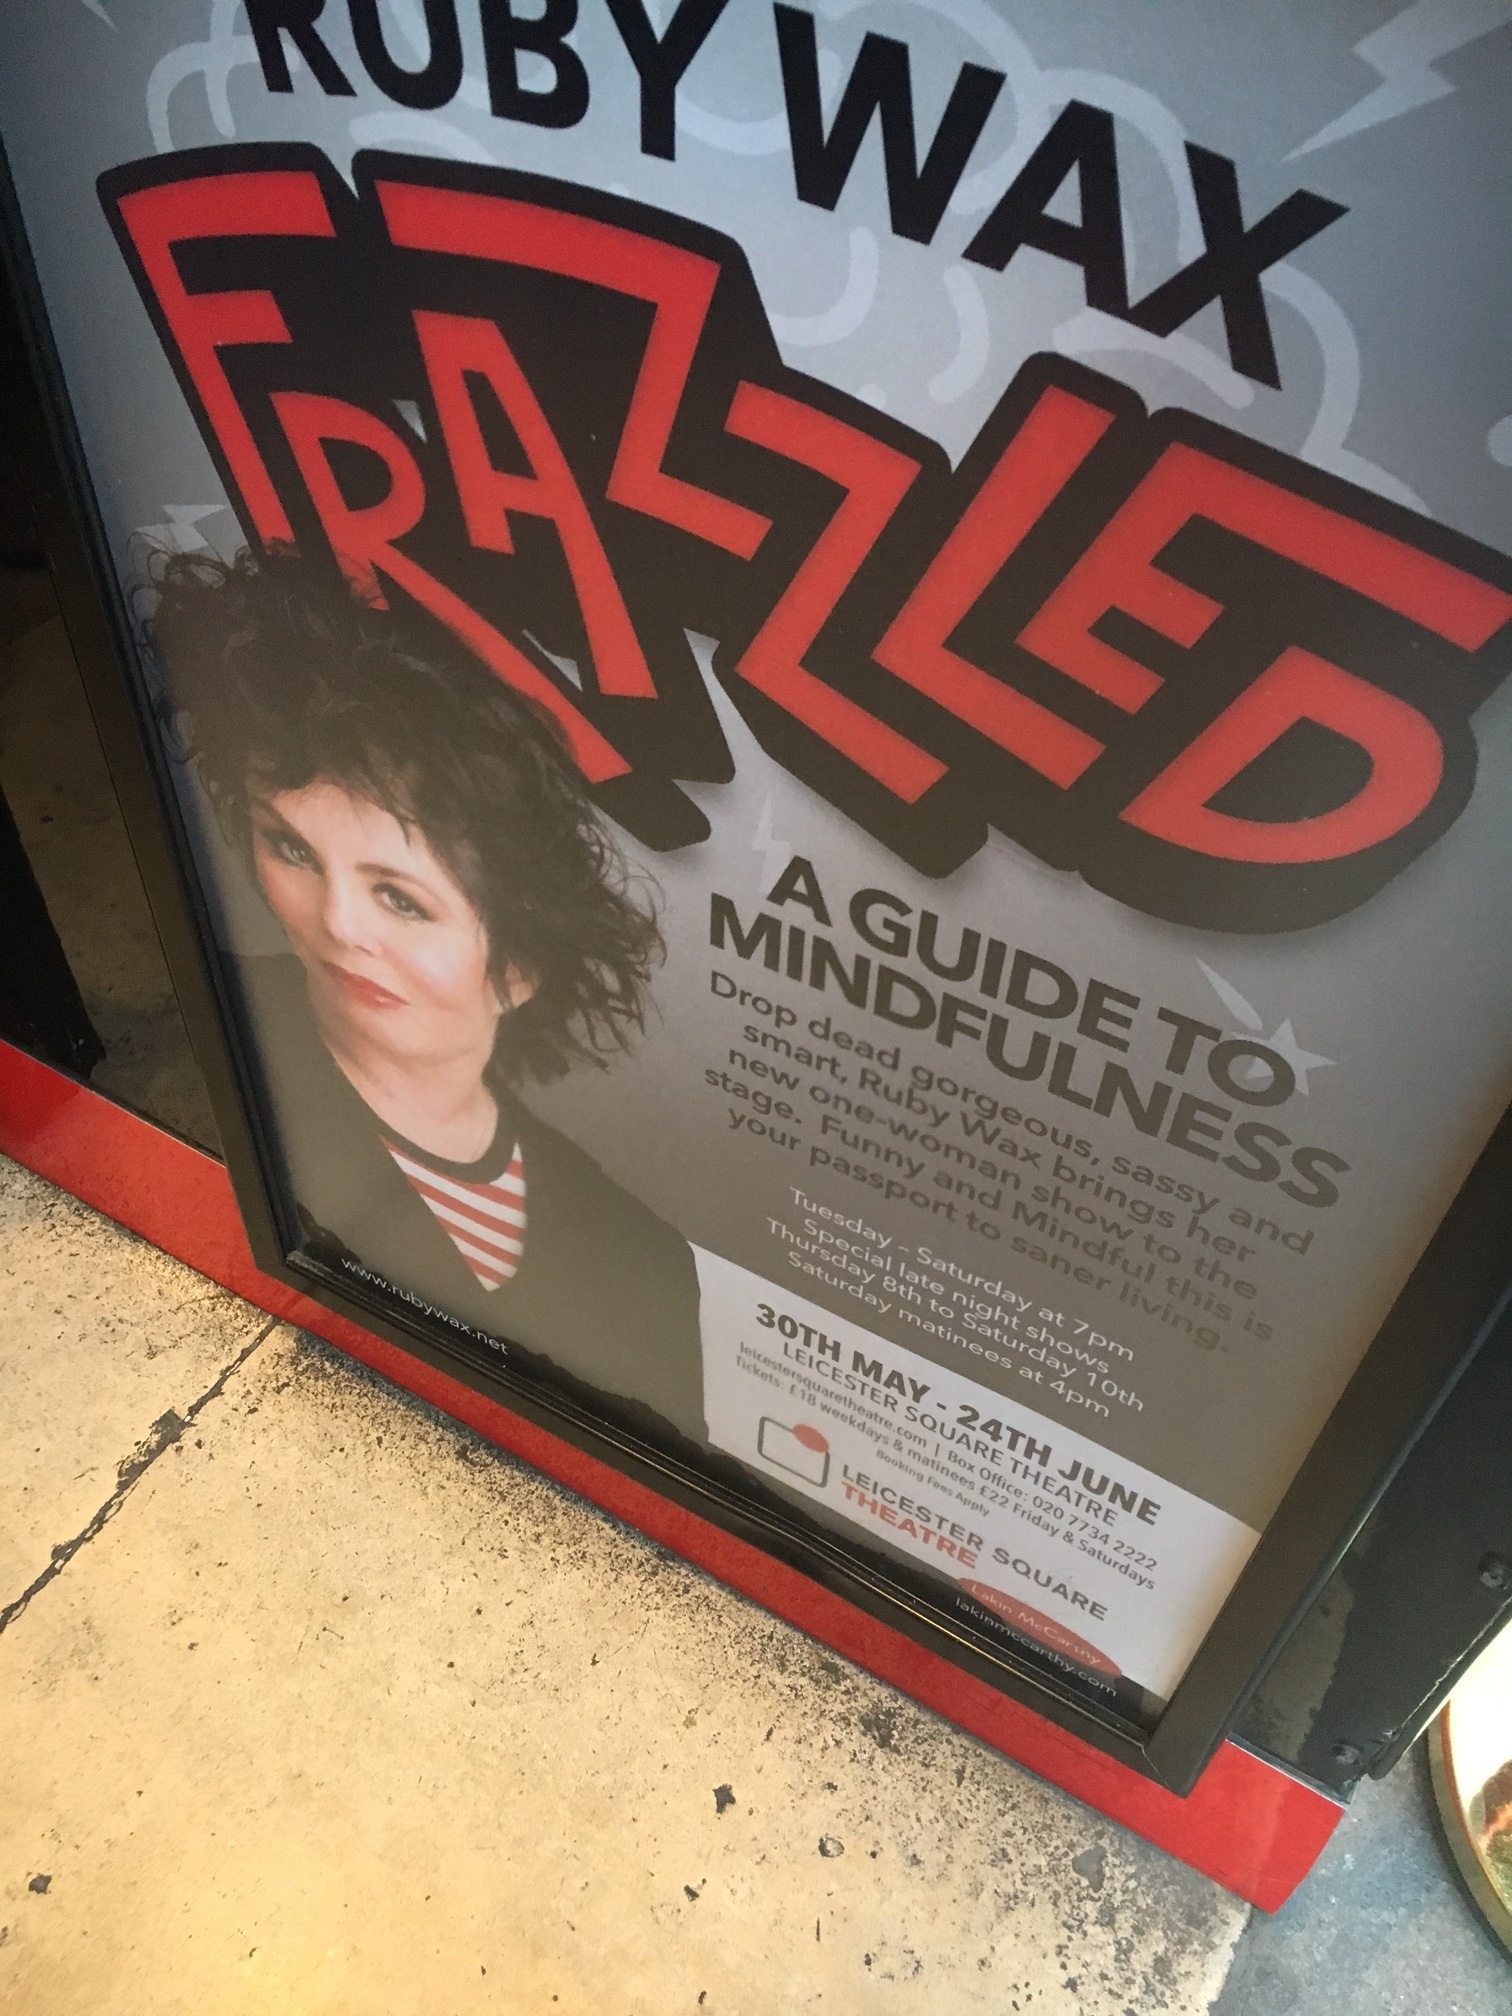 Frazzled is Ruby Wax's New London Show